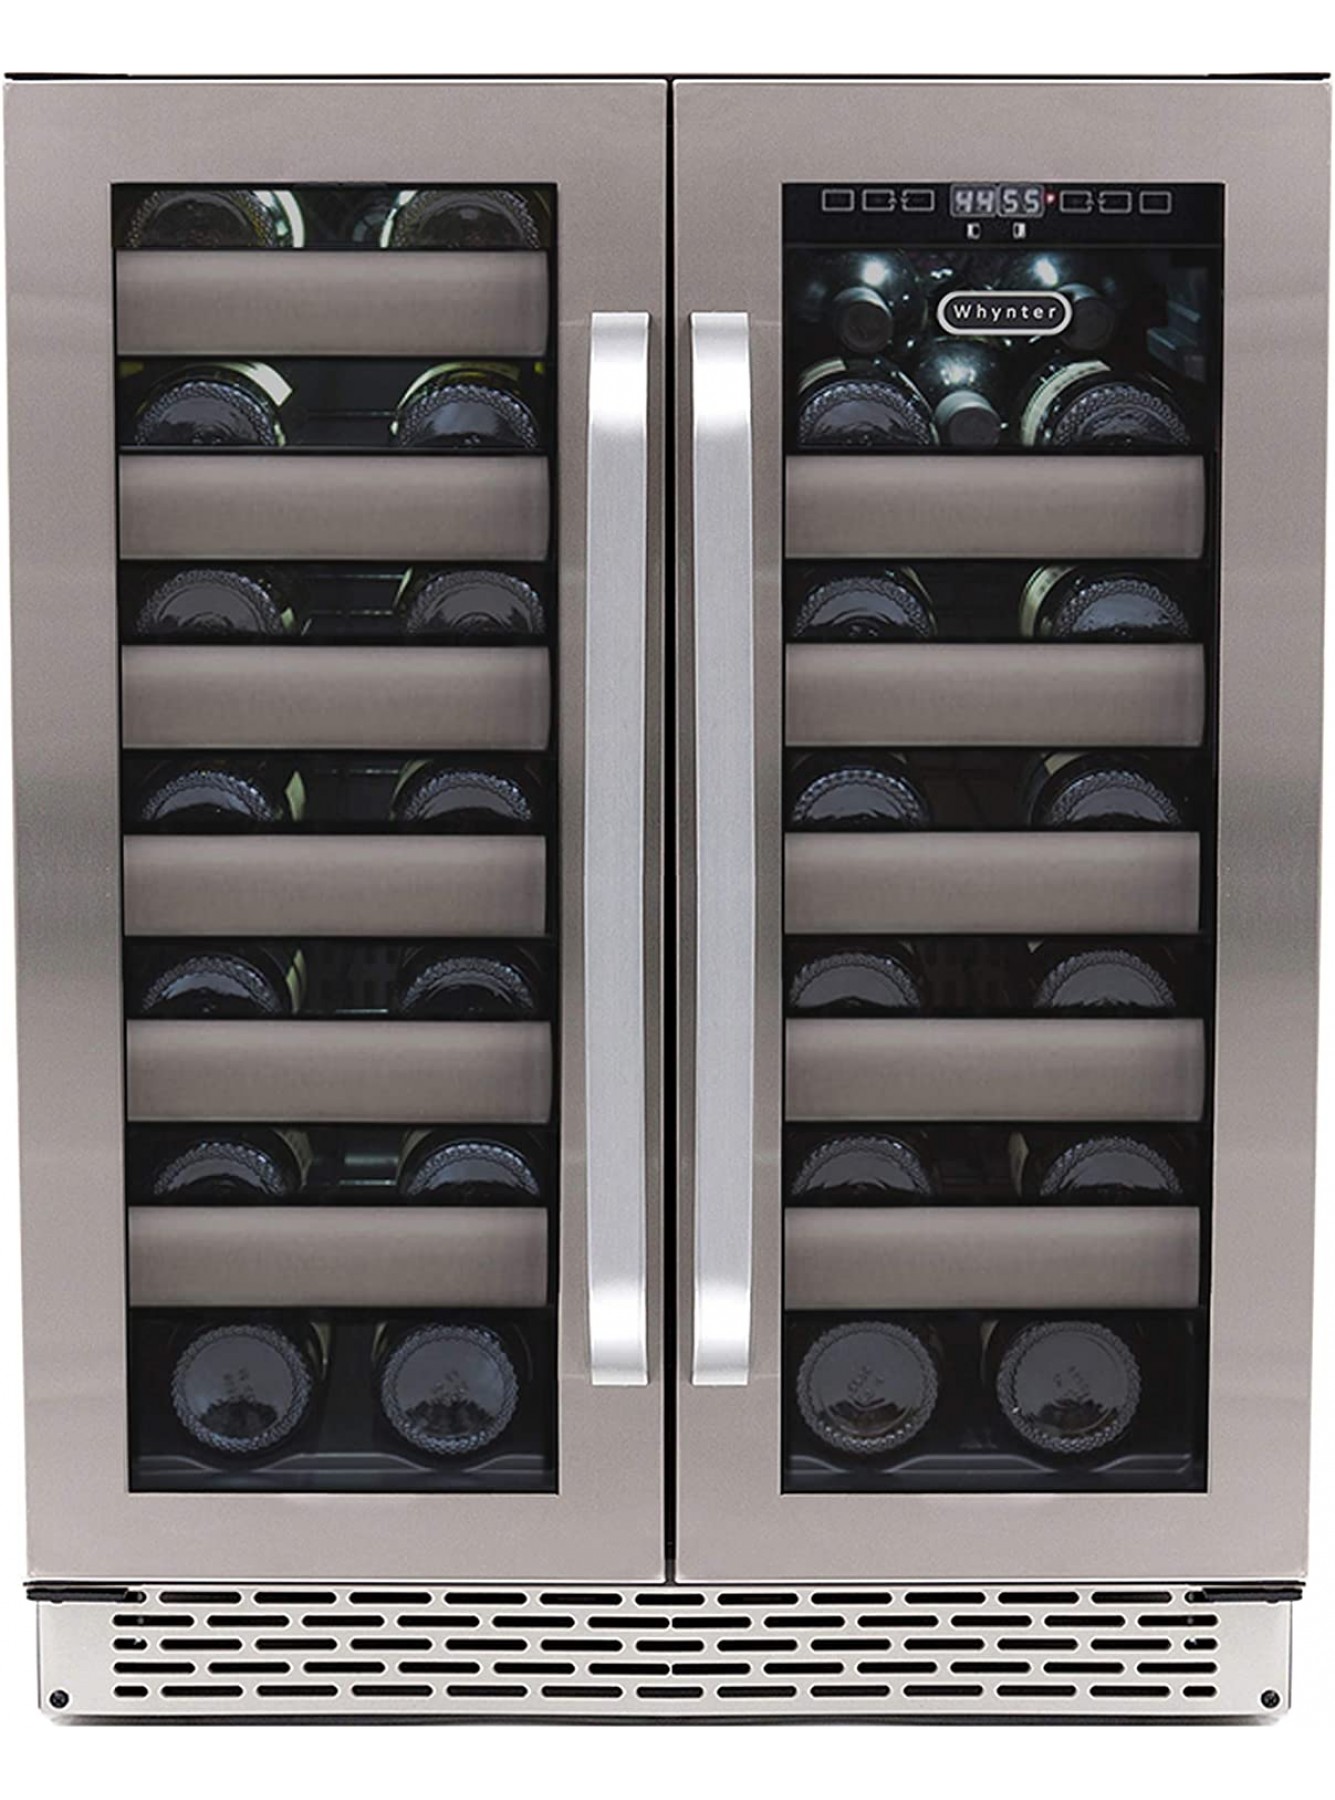 Whynter BWR-401DS 40 Bottle Stainless Steel Dual Zone Built Wine Refrigerators-Elite Series with Seamless Doors B00ITPAL48